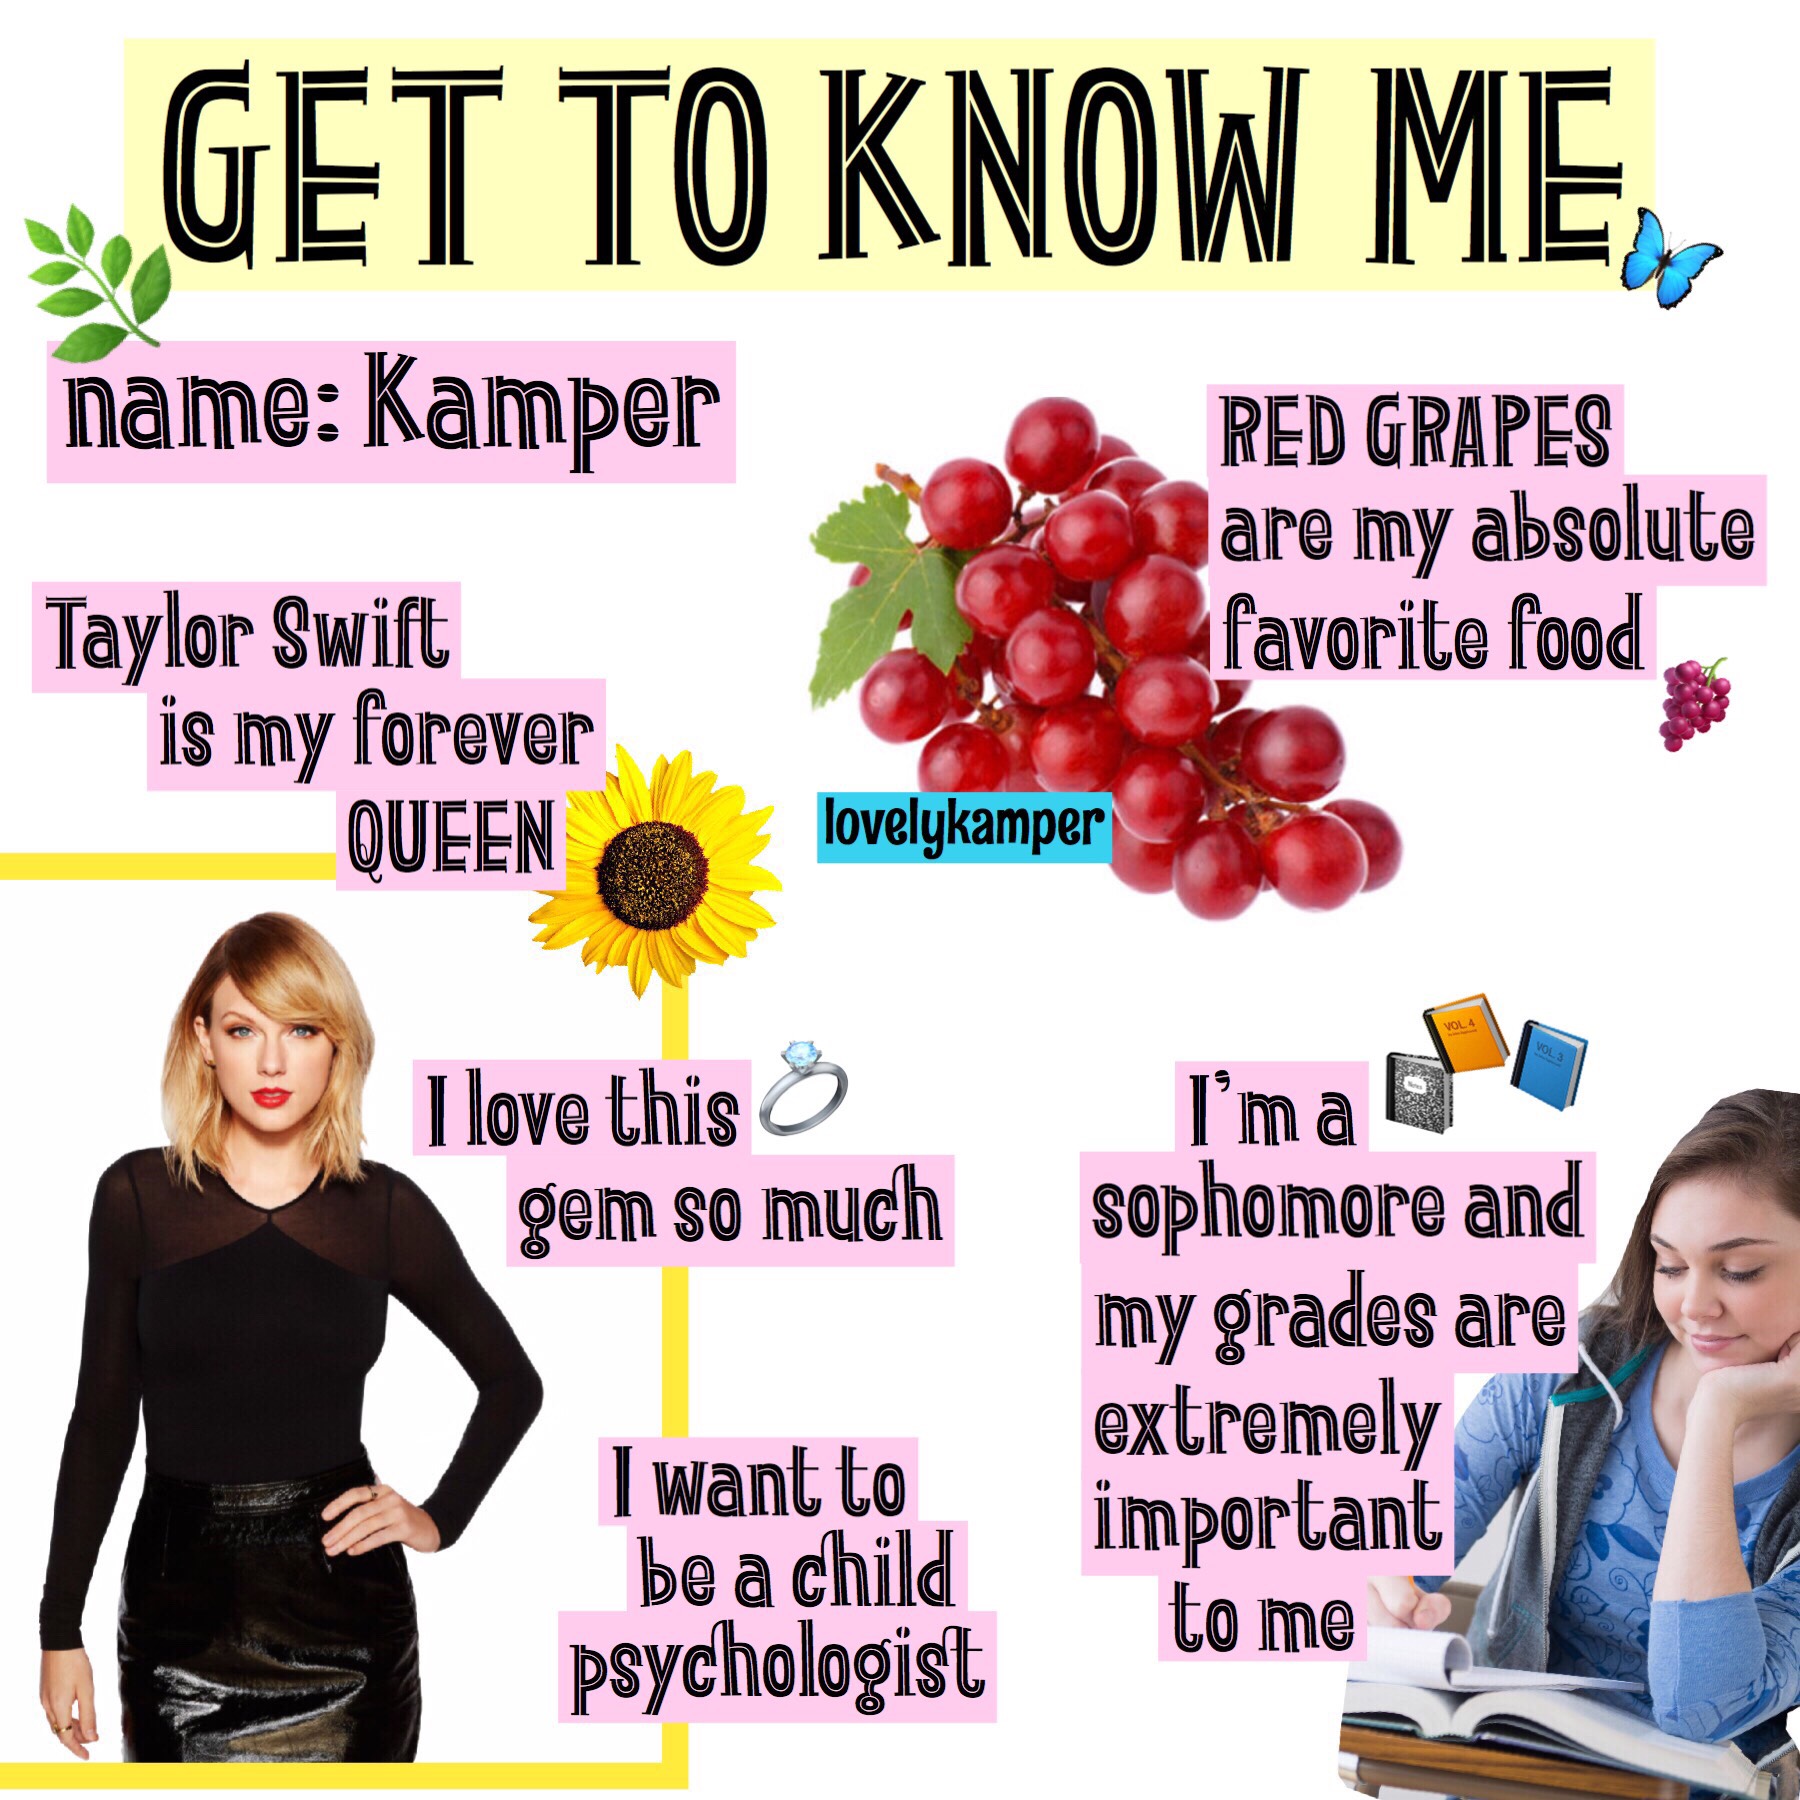 Hey guys! My instagram is @lovelykamper I’m a niche meme page! Please check it out!